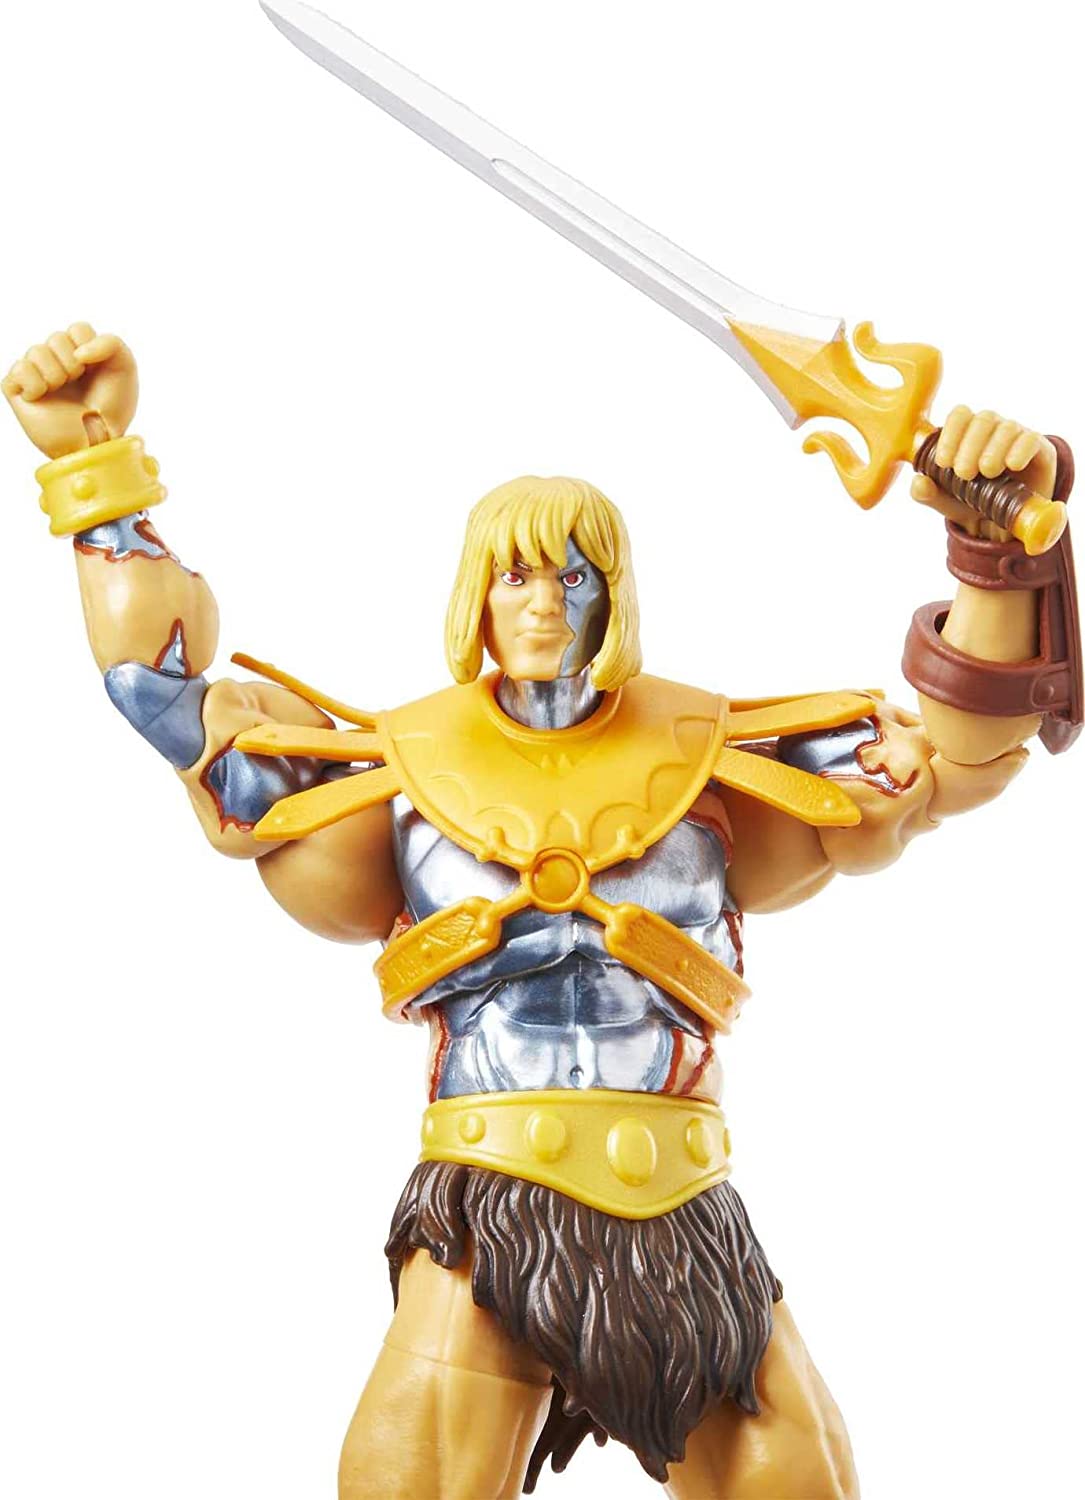 Masters of The Universe Masterverse Battle Armor He-Man Action Figure